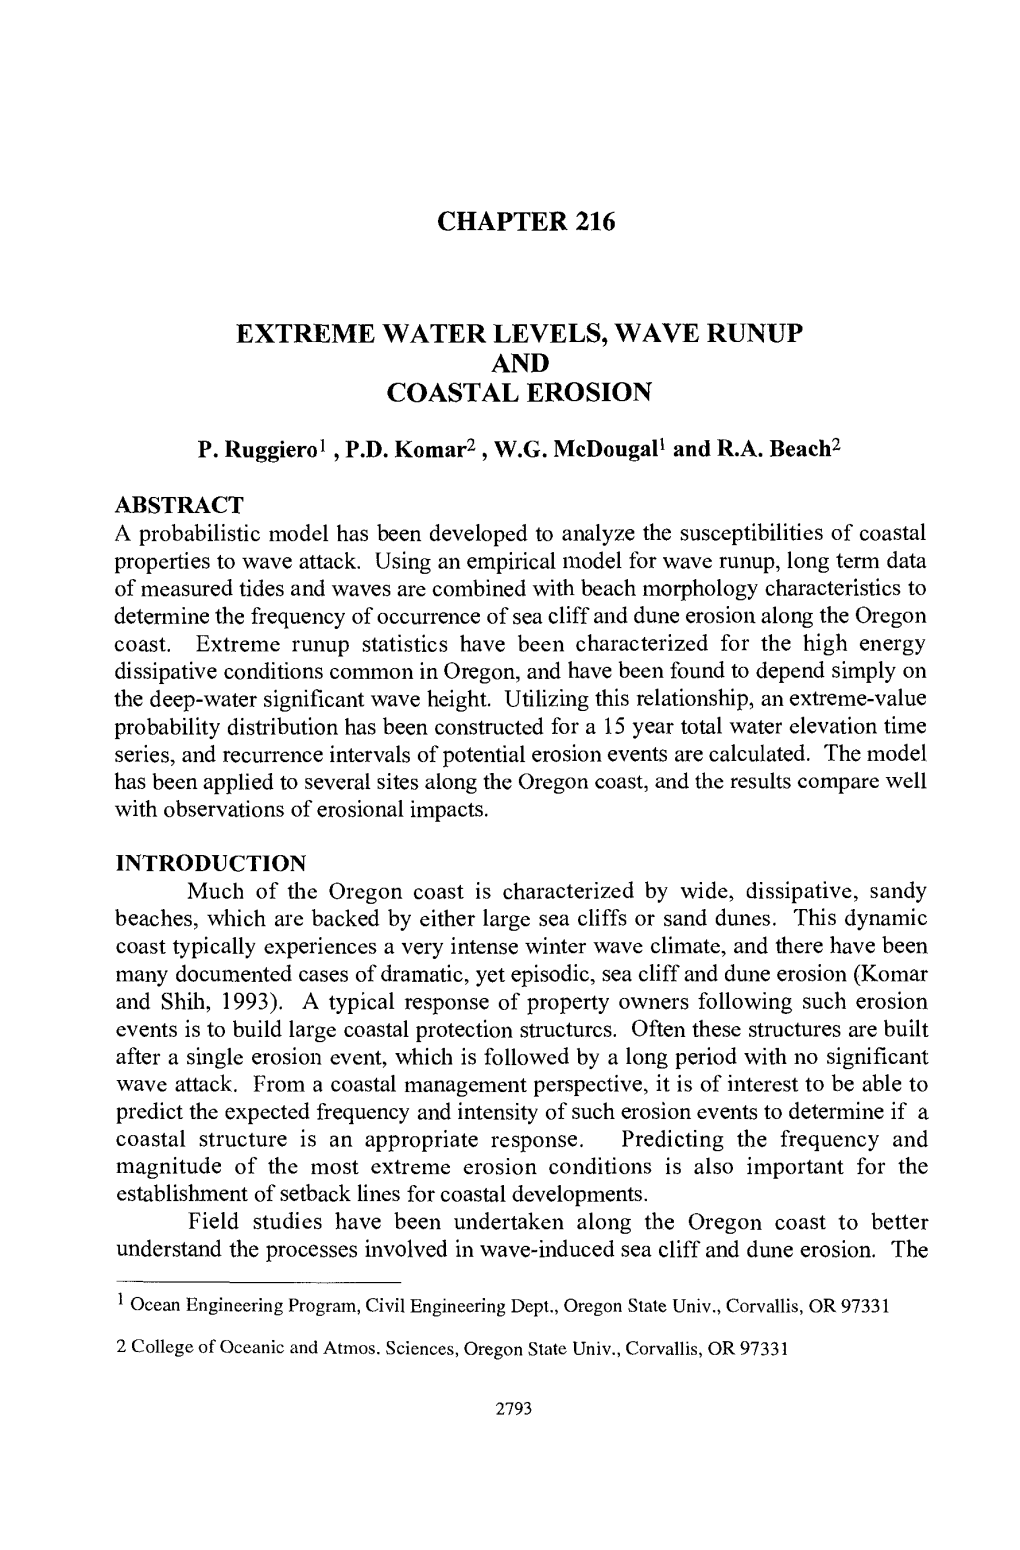 Chapter 216 Extreme Water Levels, Wave Runup And